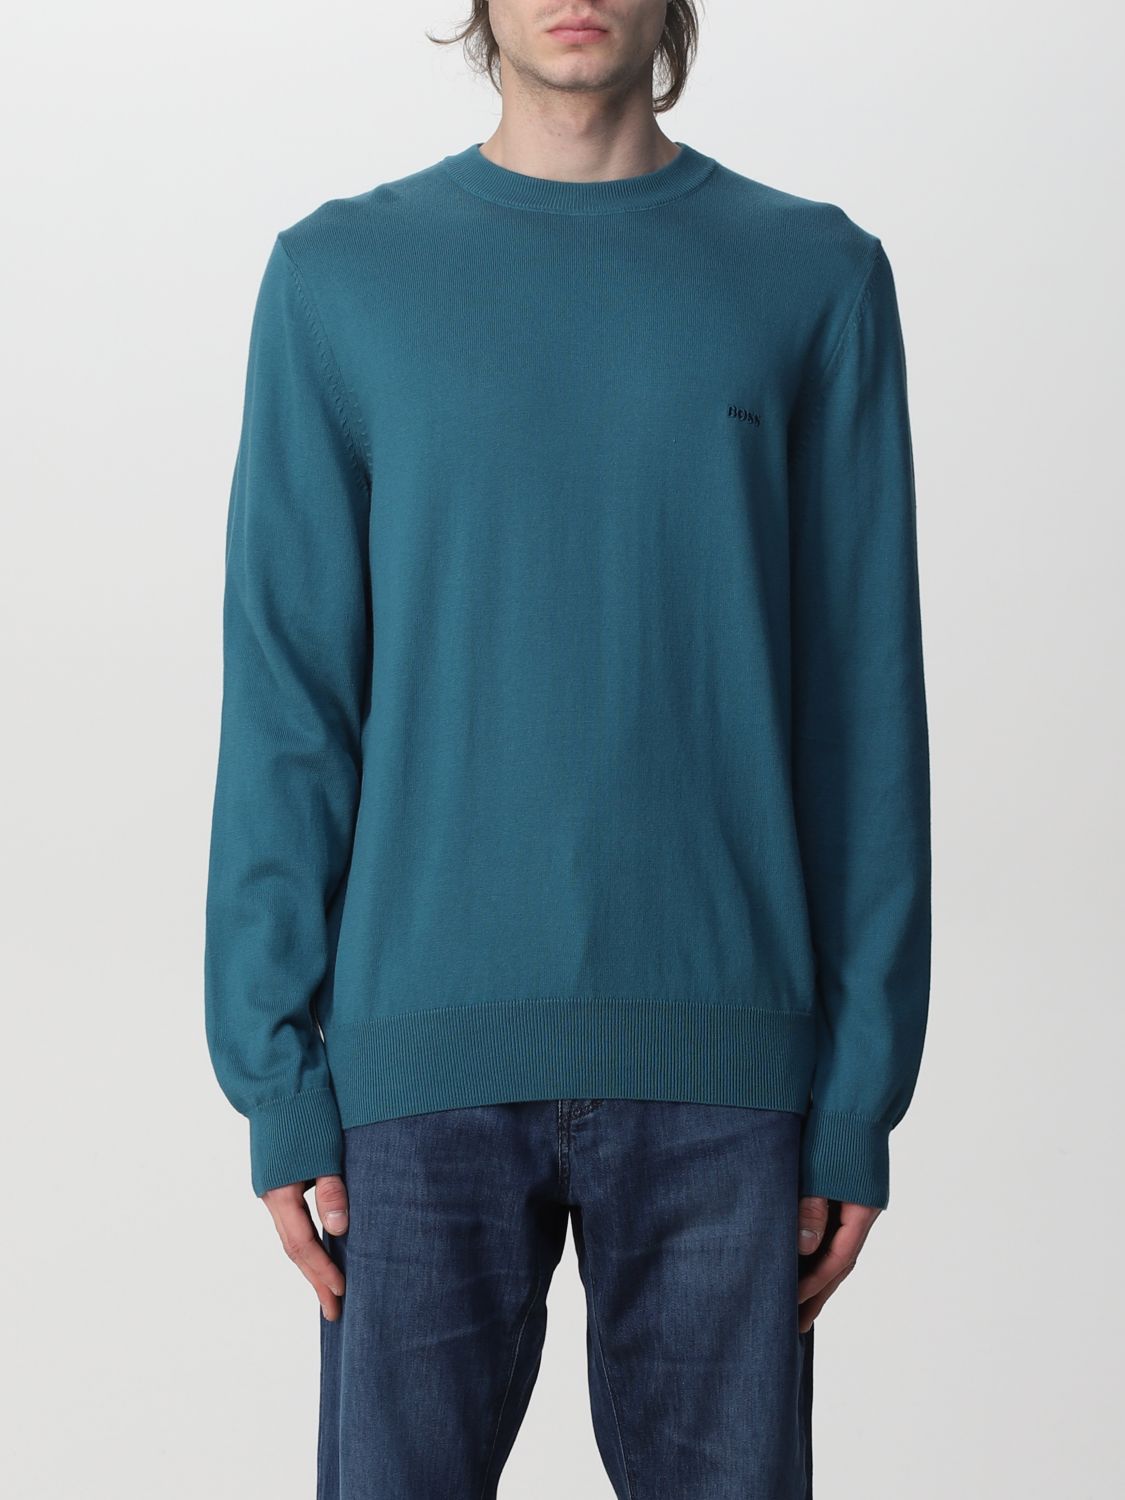 BOSS: sweater for man - Turquoise | Boss sweater 50466684 online on ...